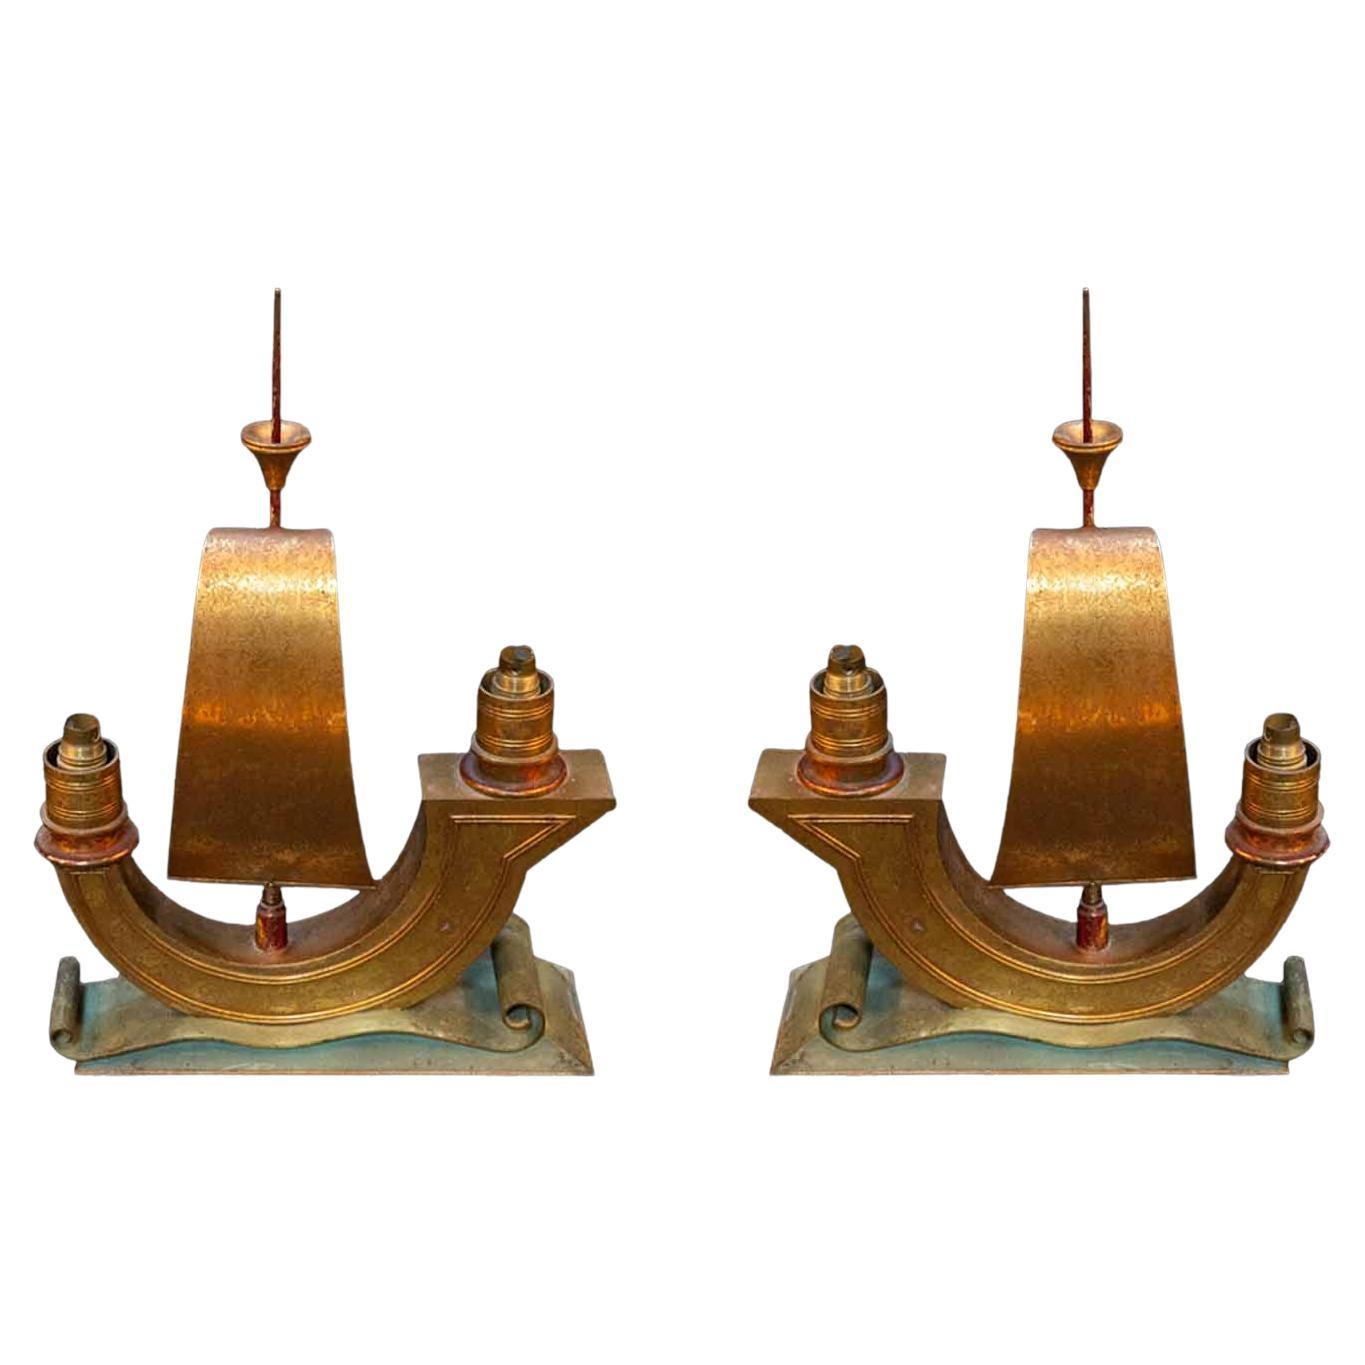 1940's French Bronze Galleon Ship Lamps, Pair